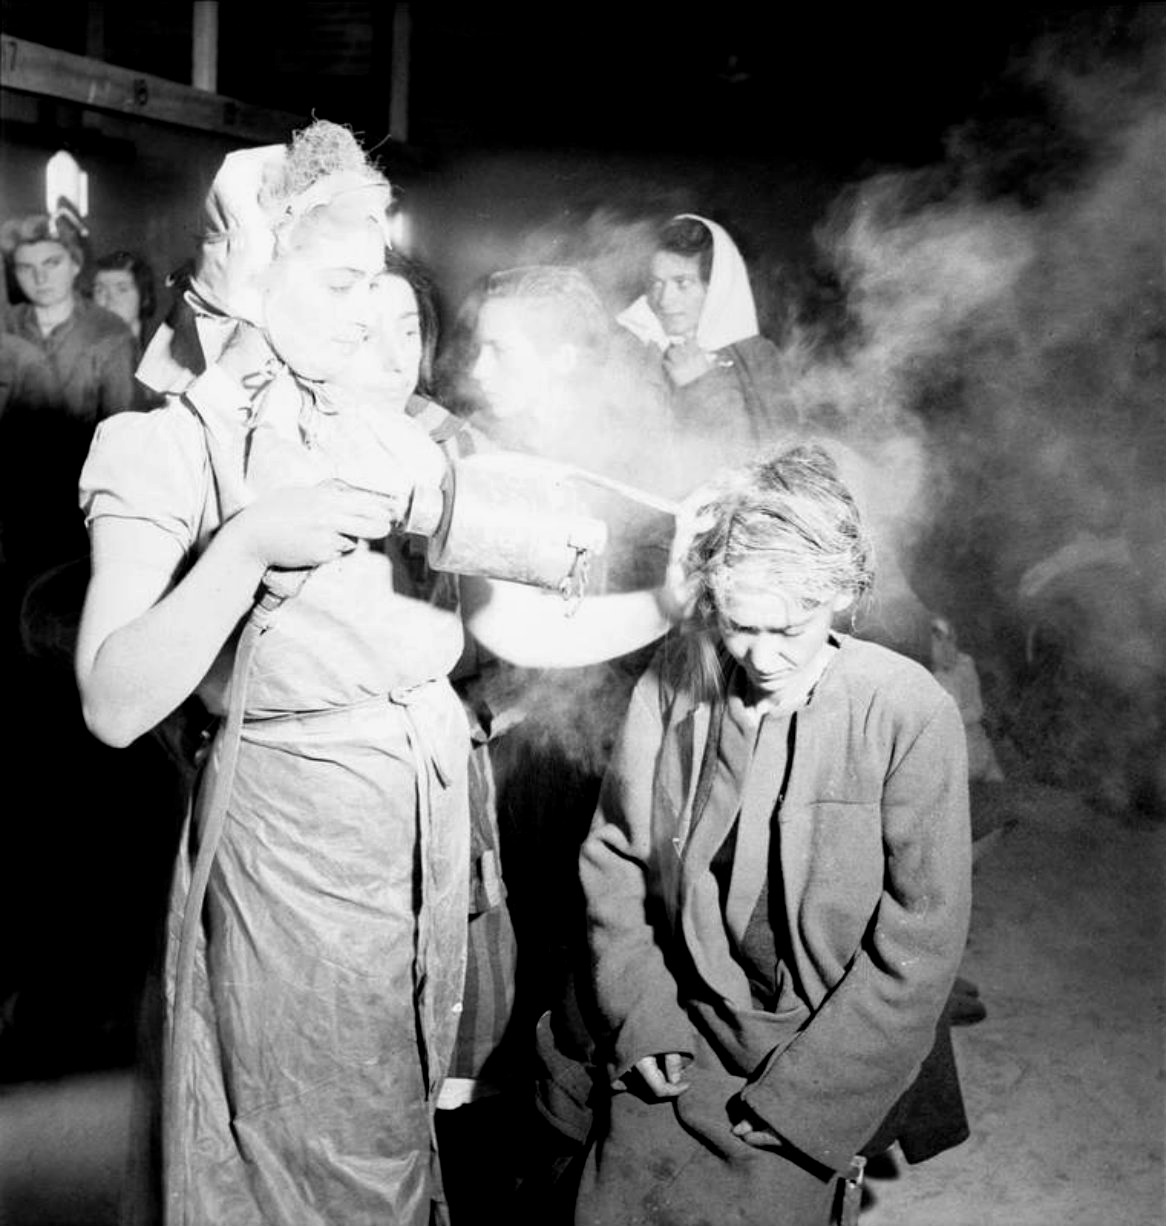 Newly liberated female inmates at Bergen-Belsen concentration camp are dusted with DDT powder to kill lice which spreads typhus. May, 1945.